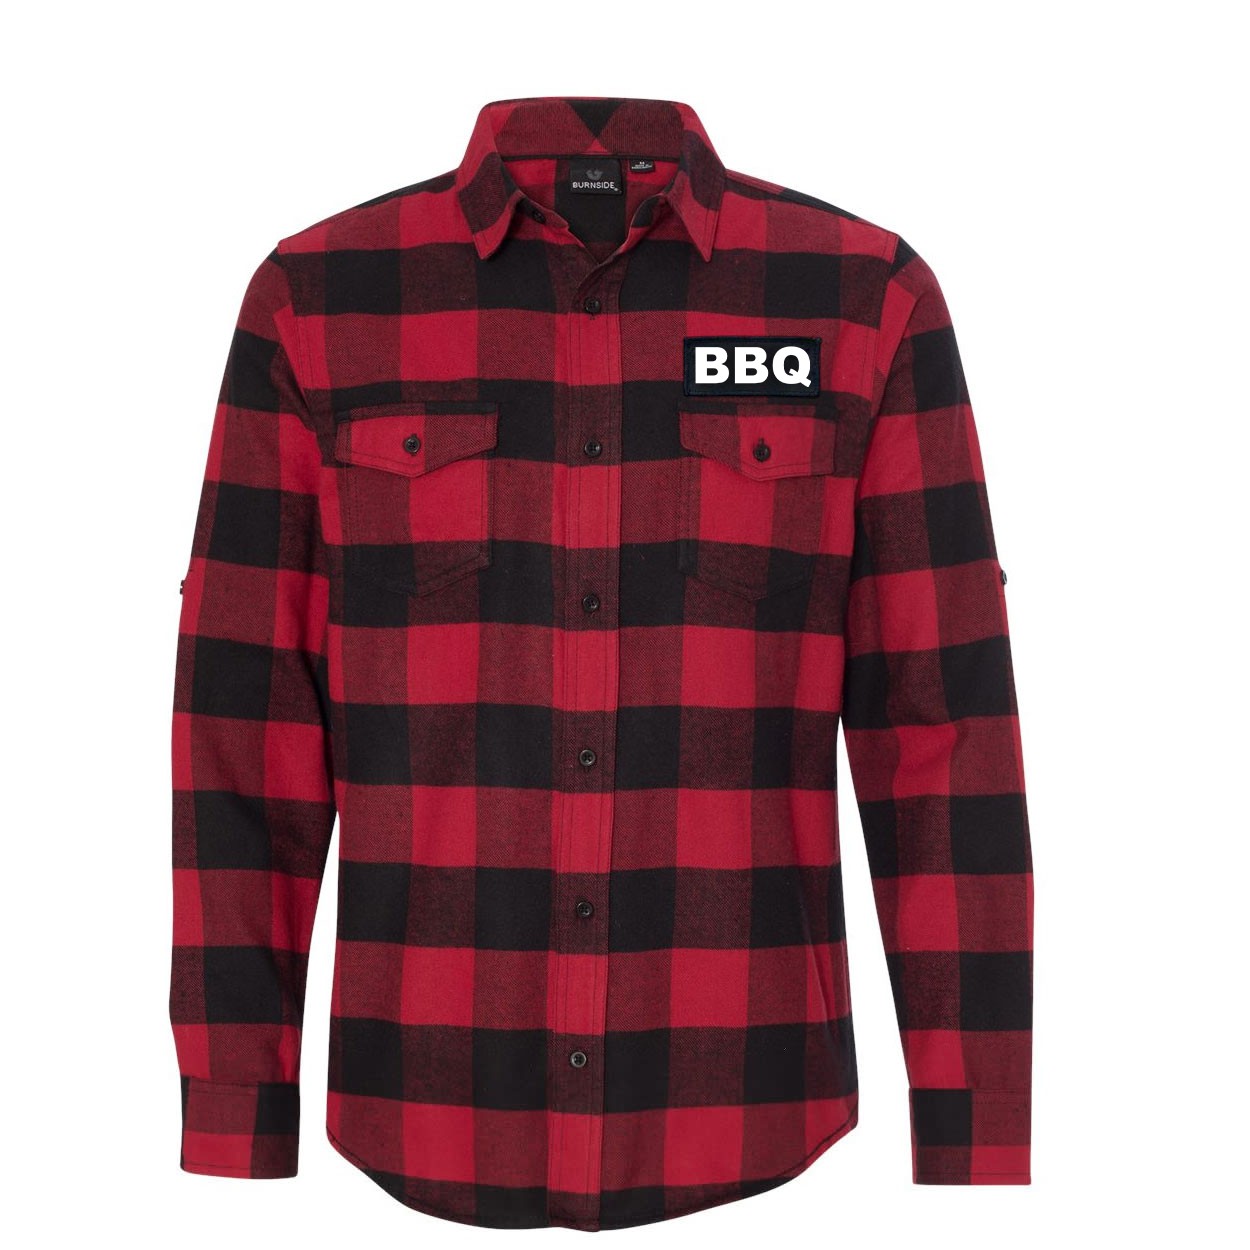 BBQ Brand Logo Night Out Rectangle Woven Patch Flannel Shirt Long Sleeve Red/Black Buffalo (White Logo)